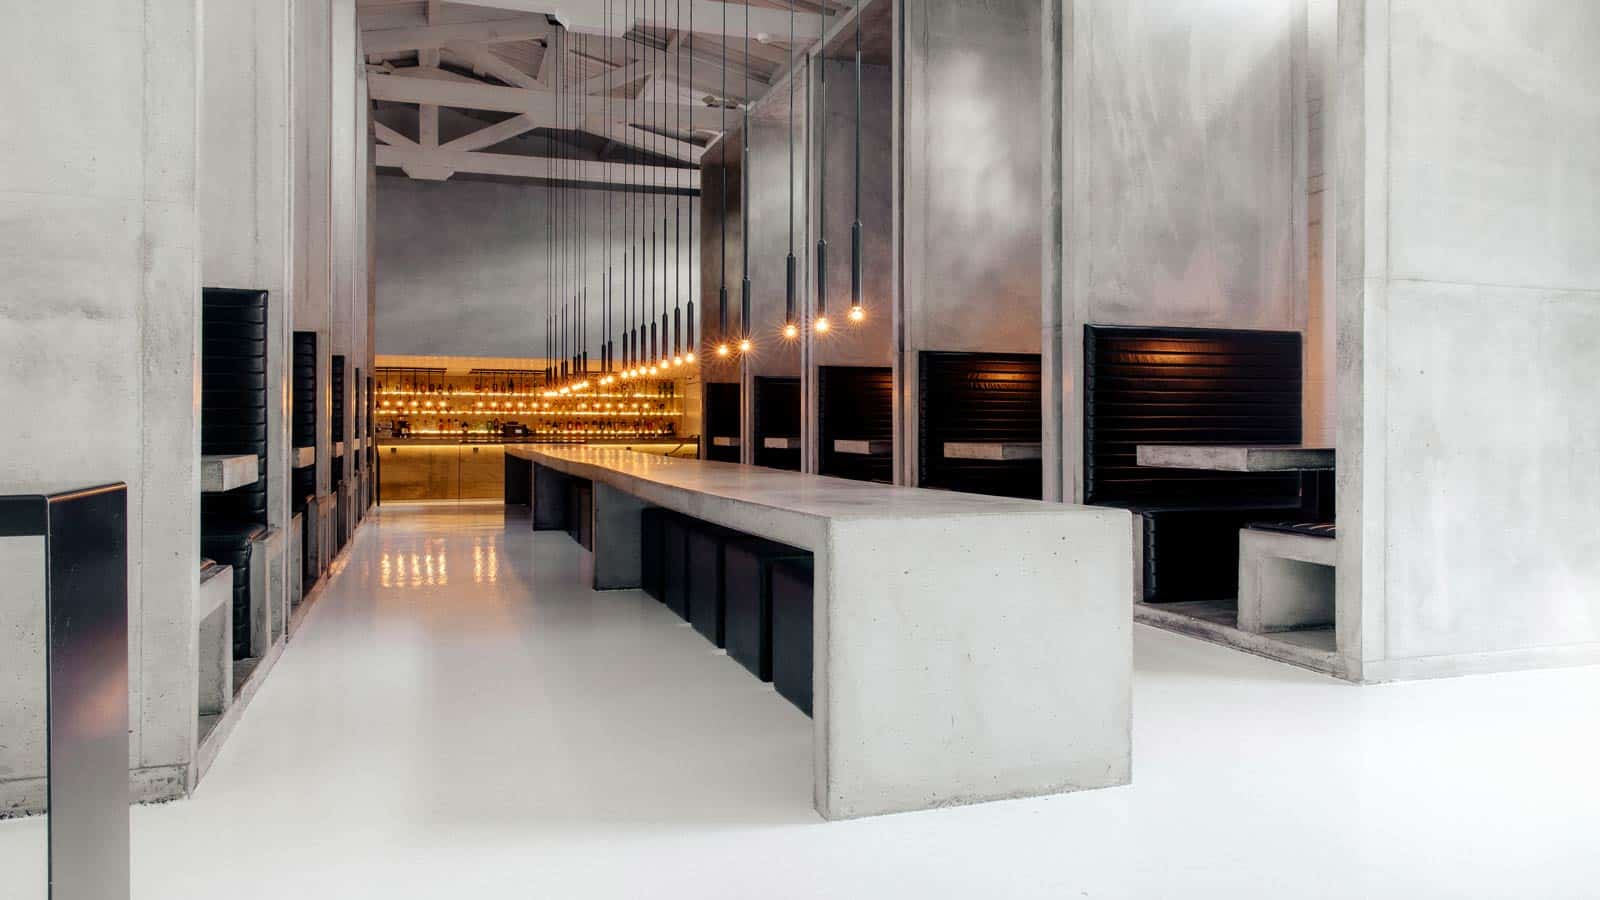 <p><span>800 N Palm Canyon Dr, Palm Springs, CA 92262</span></p><p><span>The industrial architecture of clean, modern lines made of concrete and iron is an excellent backdrop for an incredible culinary experience at <a href="https://www.workshopkitchenbar.com/" rel="nofollow noopener">Workshop</a>. In 2012, the chefs and owners partnered to renovate this 1926 historic El Paseo building in Palm Springs Design District and have been creating James Beard award-winning dishes ever since. </span></p><p><span>Most of the restaurant’s produce is grown in Chef Michael’s home garden in Rancho Mirage and lends to the seasonal menu changes. We started our meal with a chilled asparagus soup, followed by duck fried rice and the English pea risotto paired with a Stolpman white wine.  </span></p>